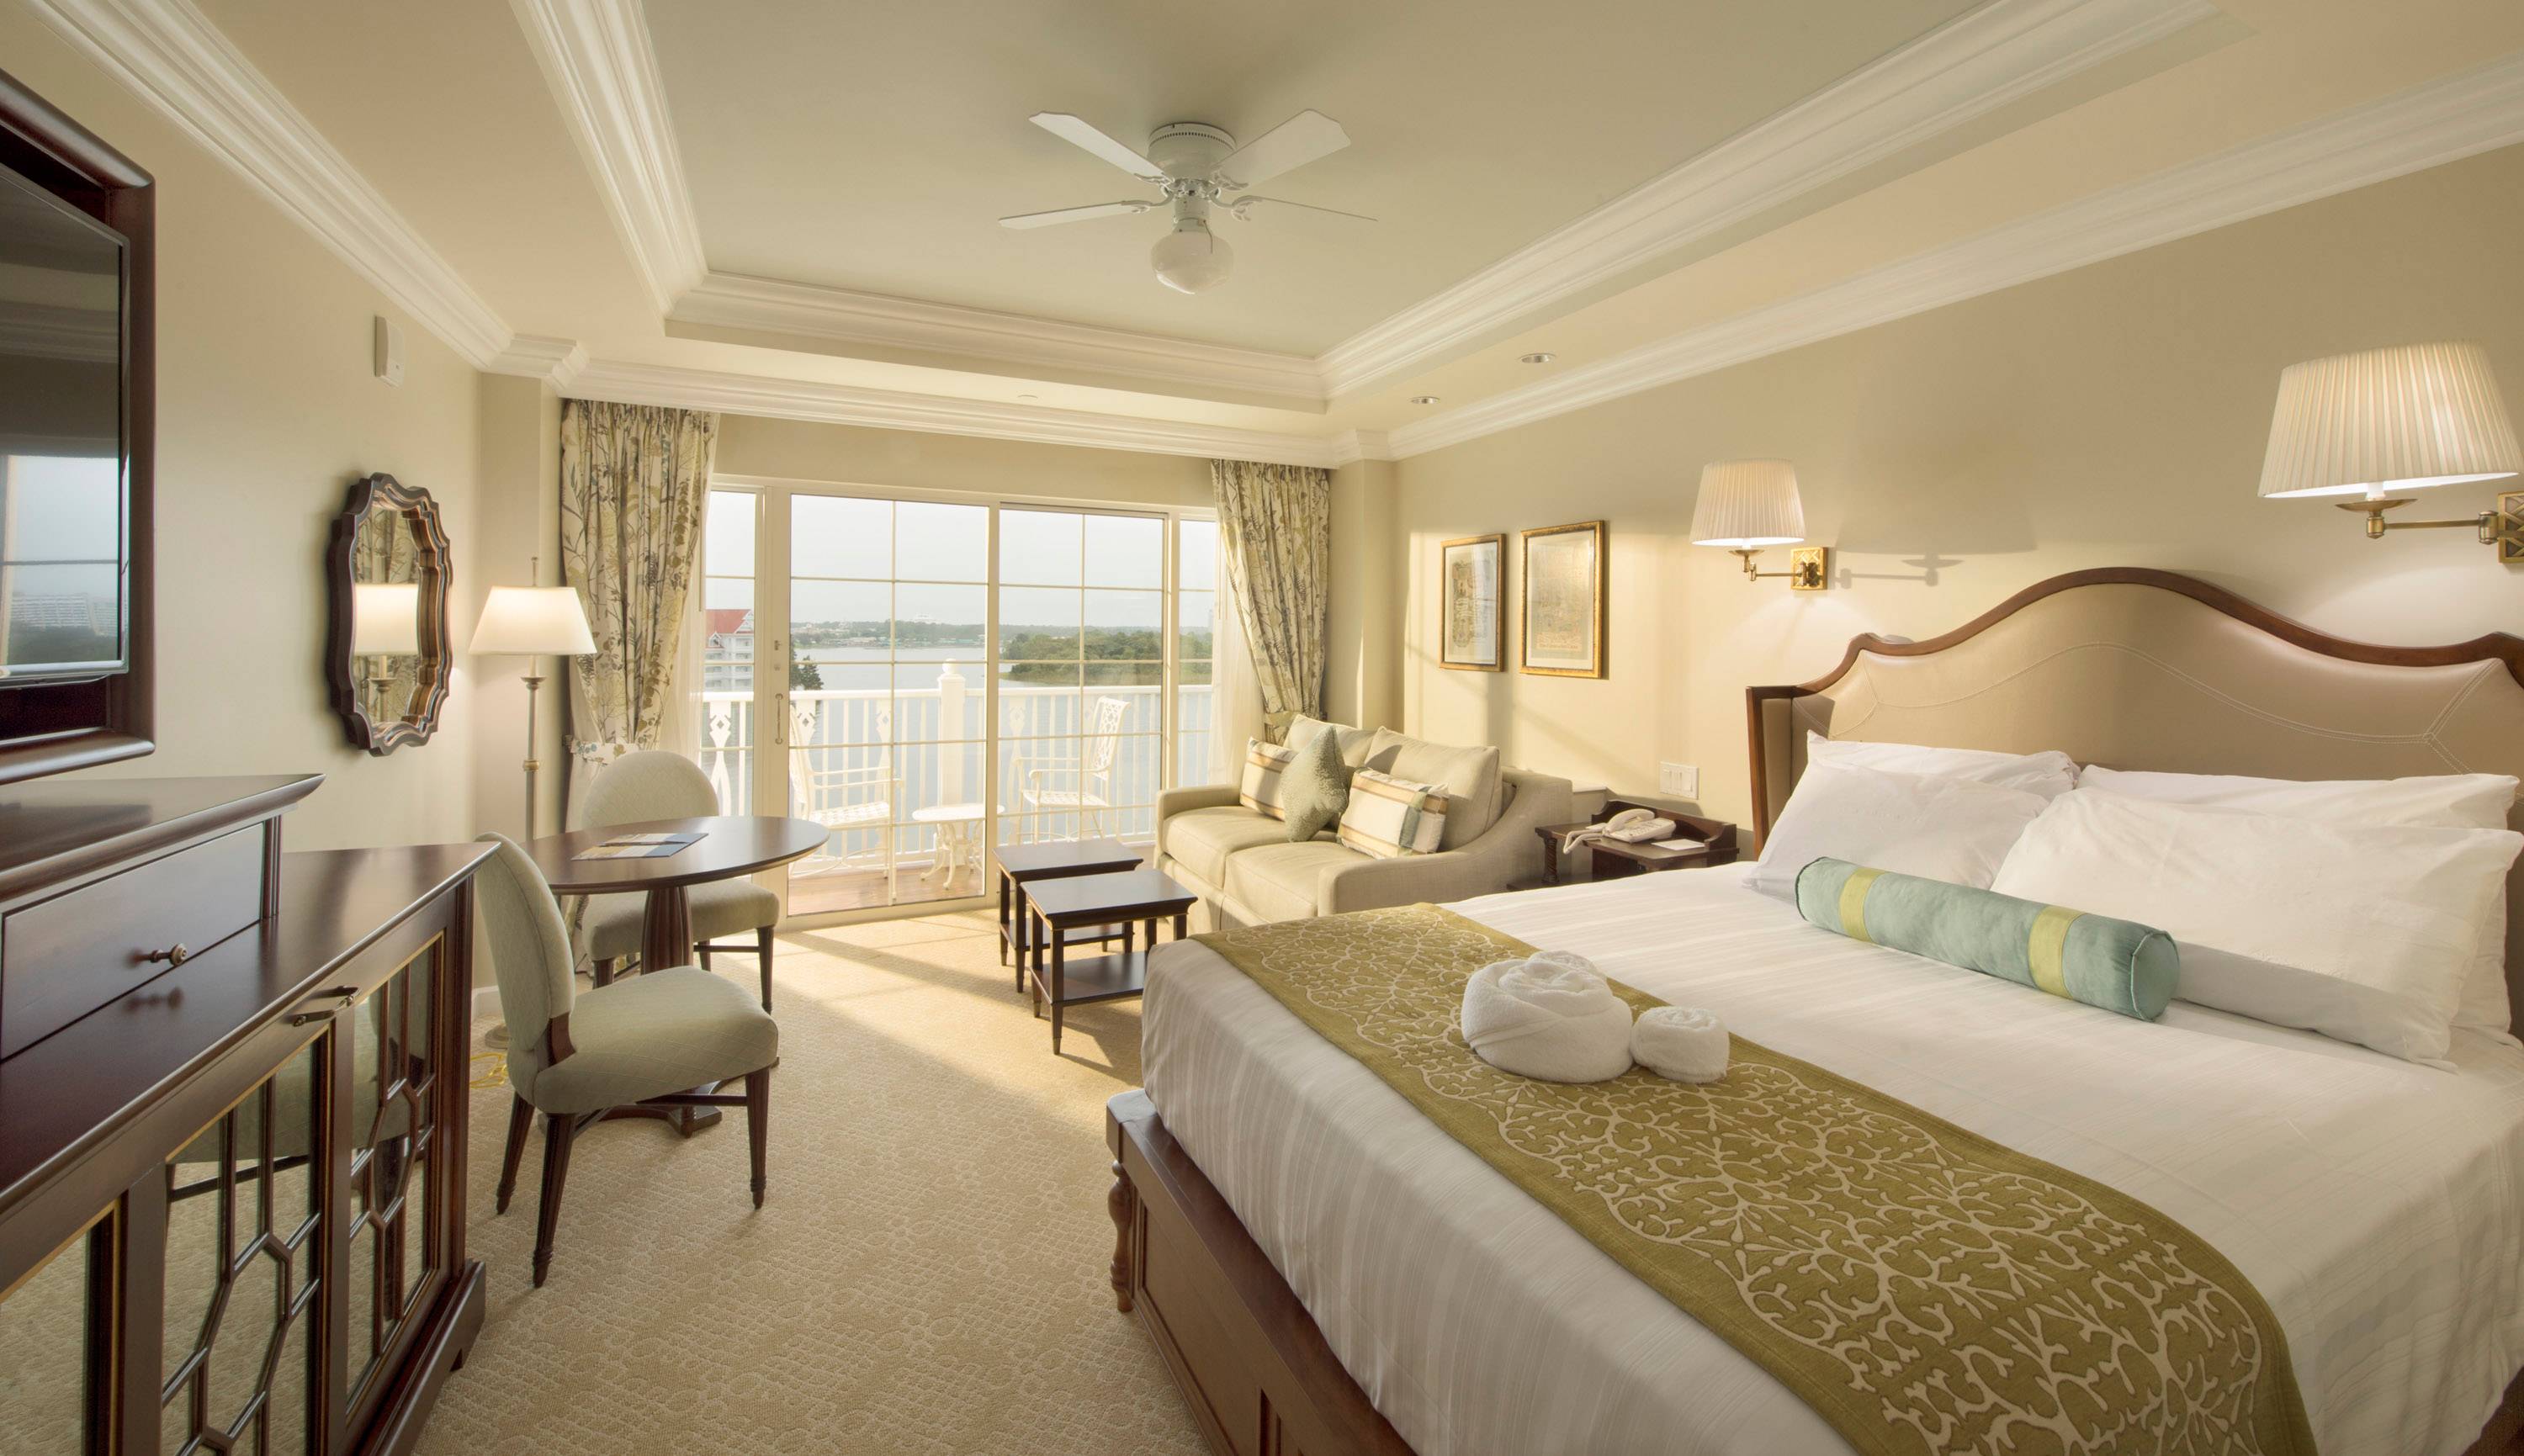 The Villas at Disney’s Grand Floridian Resort opening day